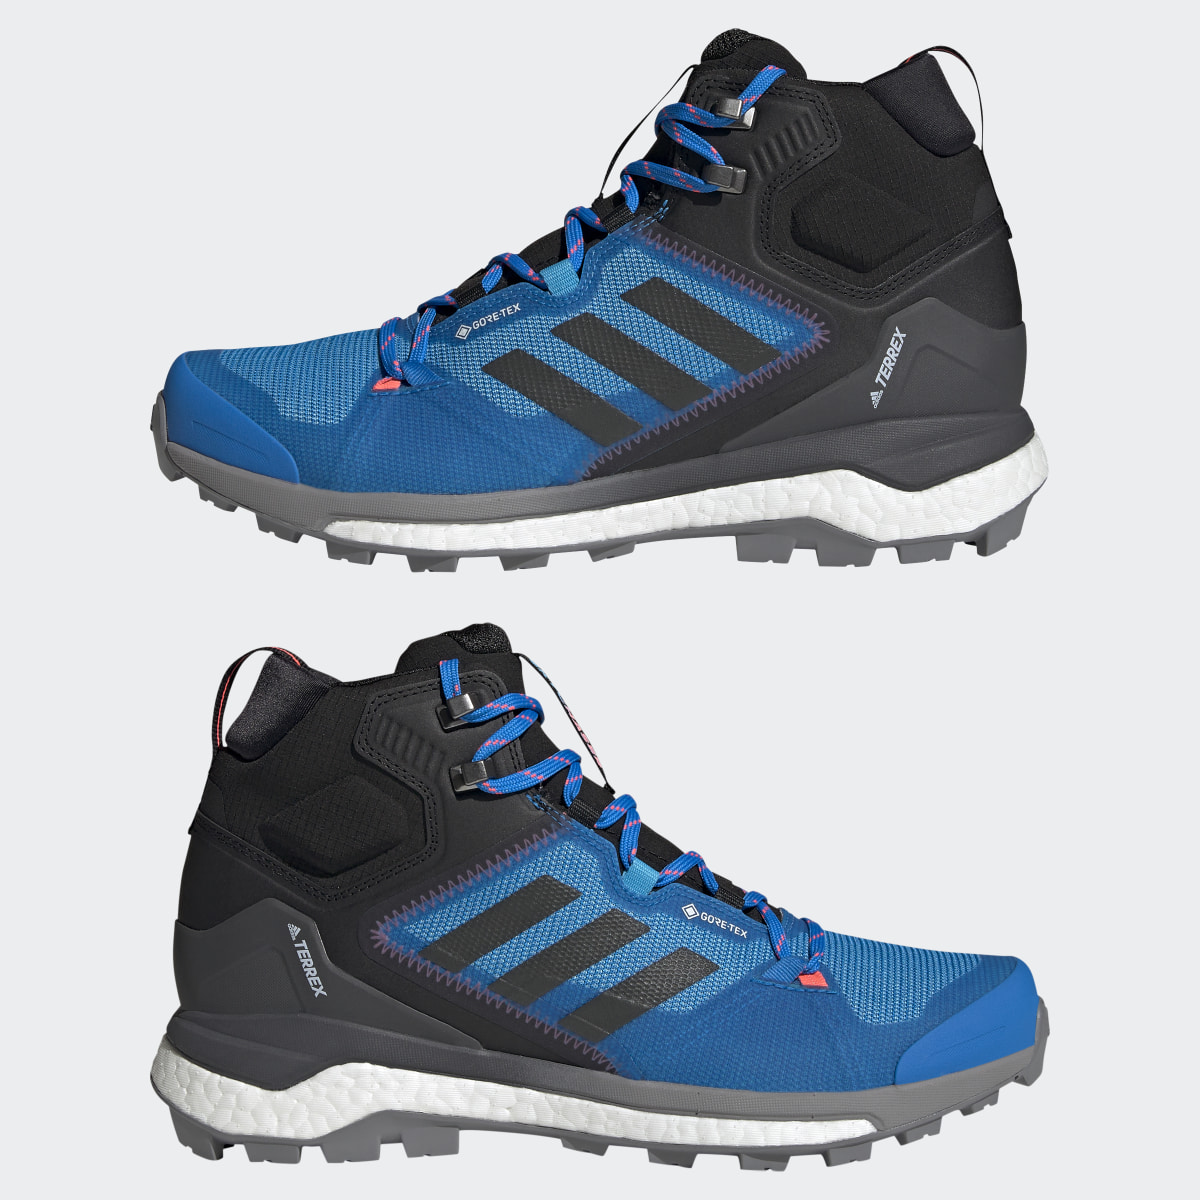 Adidas TERREX Skychaser 2 Mid GORE-TEX Hiking Shoes. 14